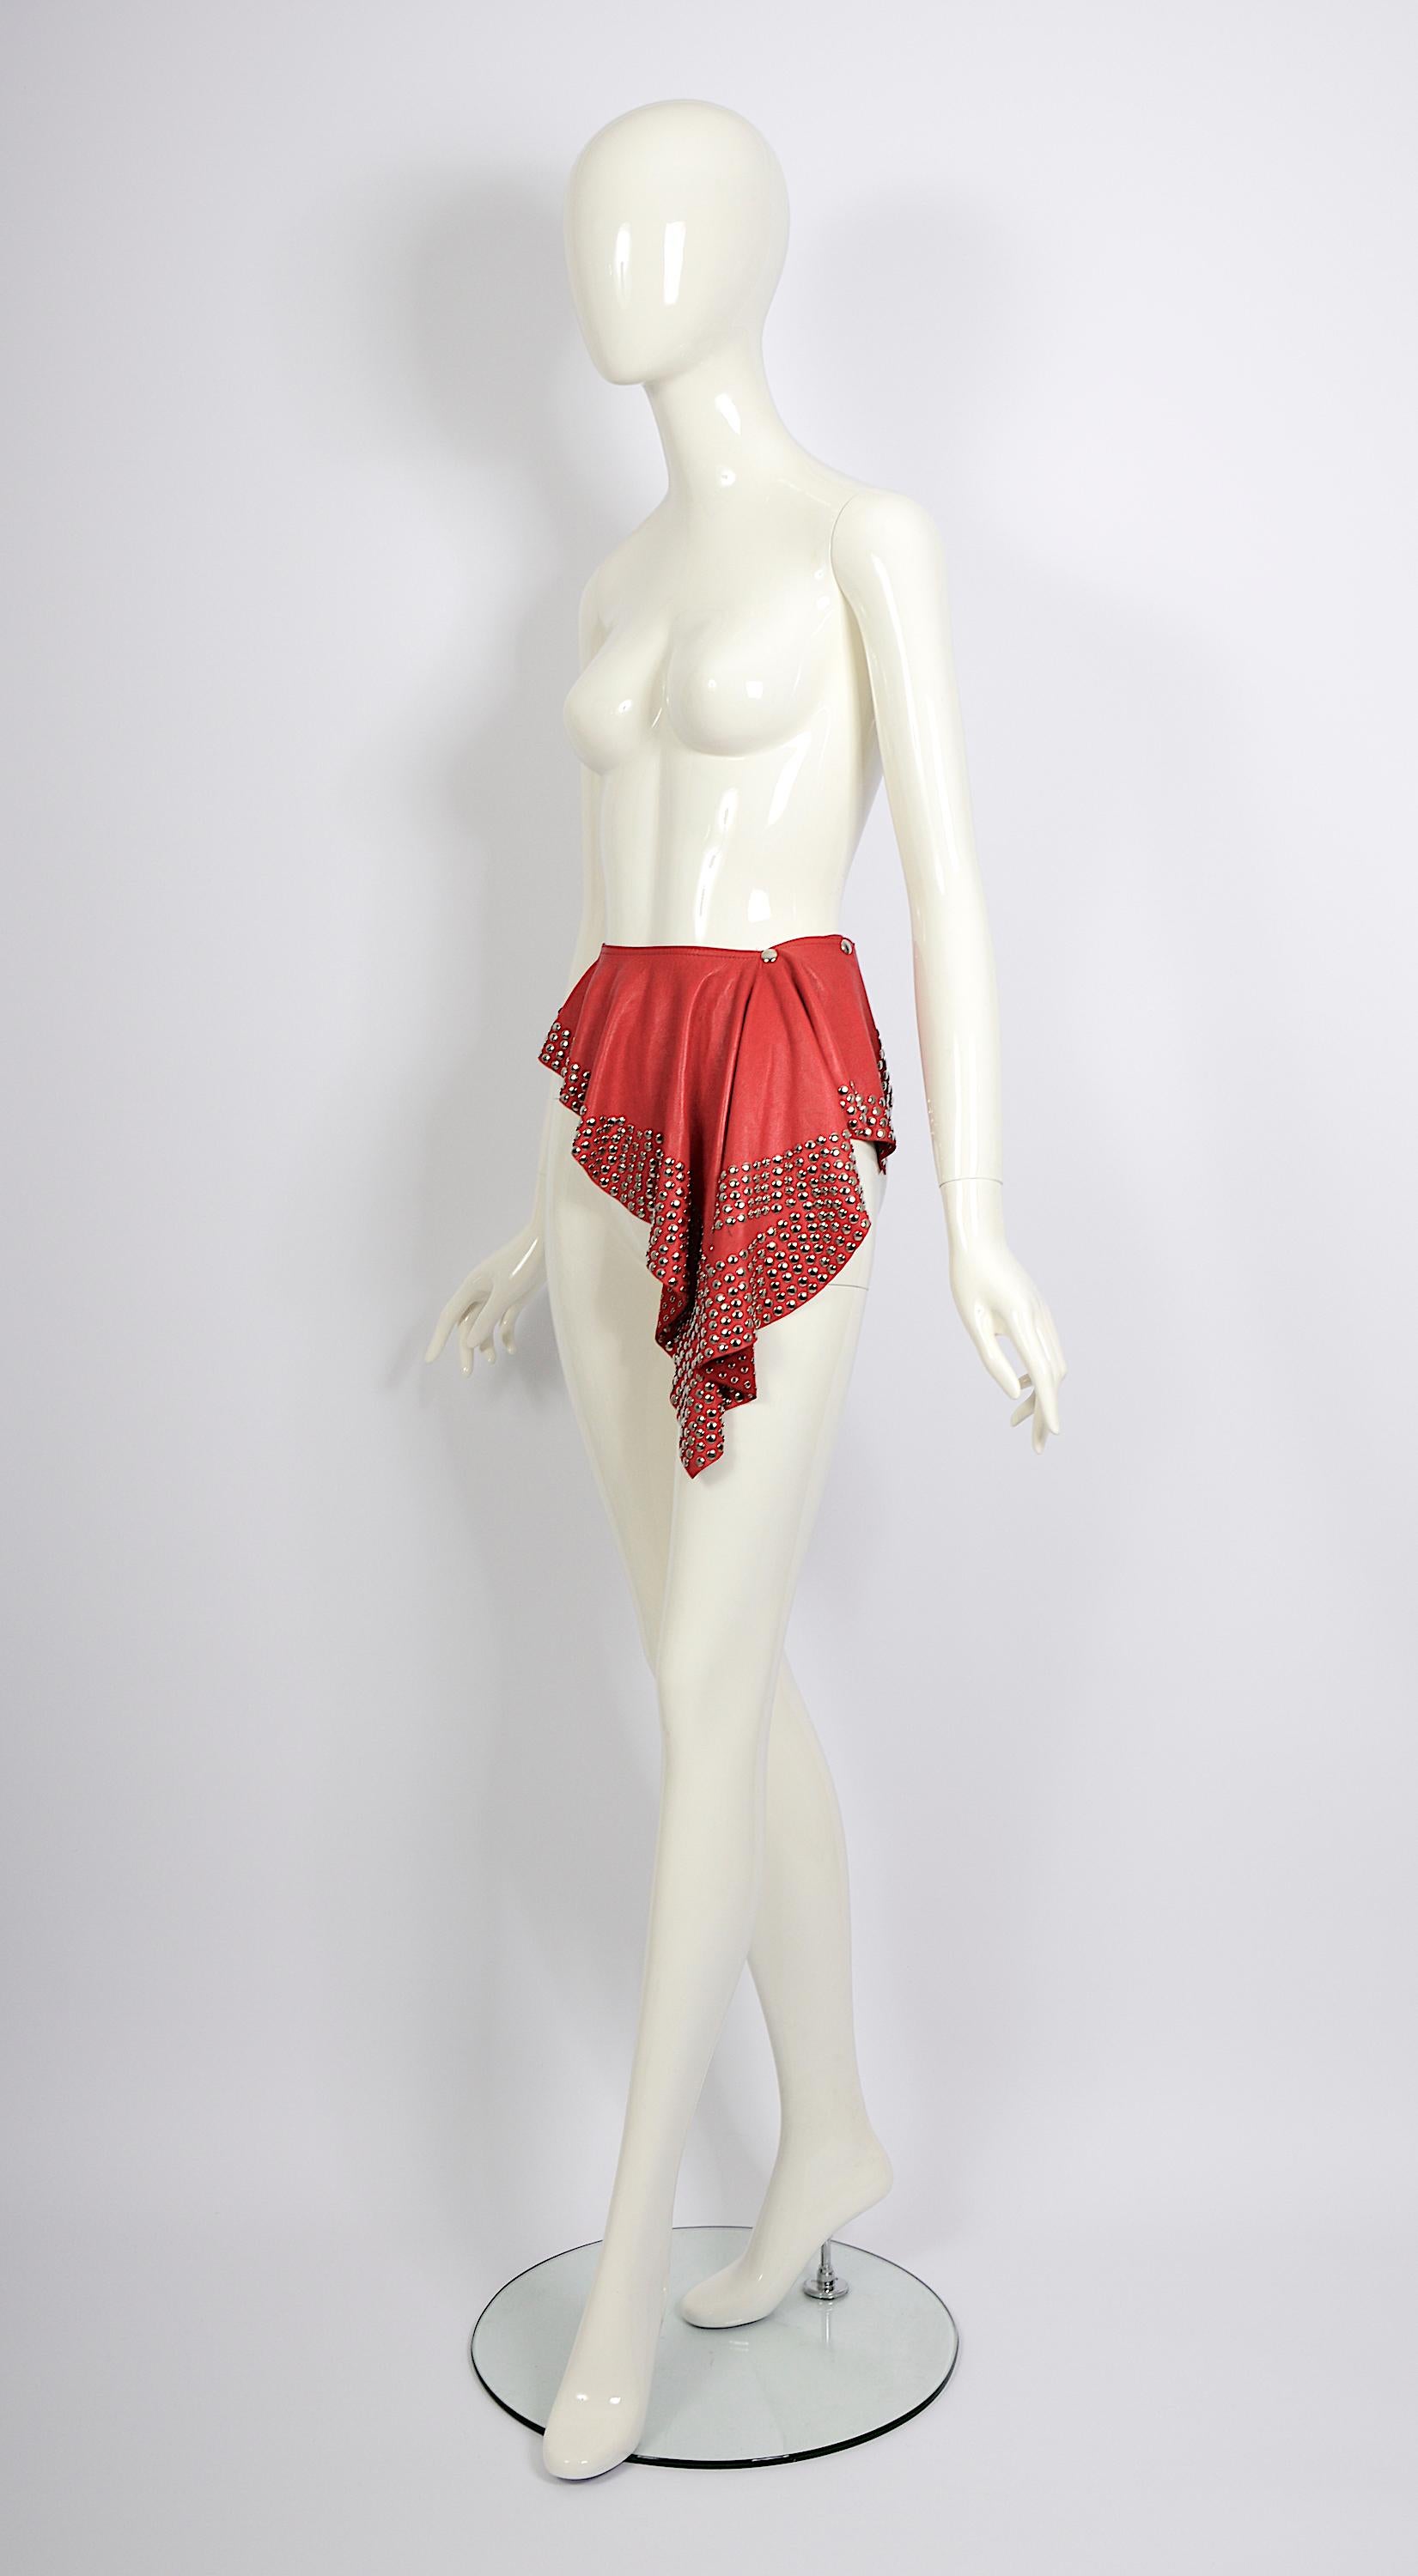 Azzedine Alaia circa 1981 collectionneurs Studded embellished red leather belt skirt en vente 7